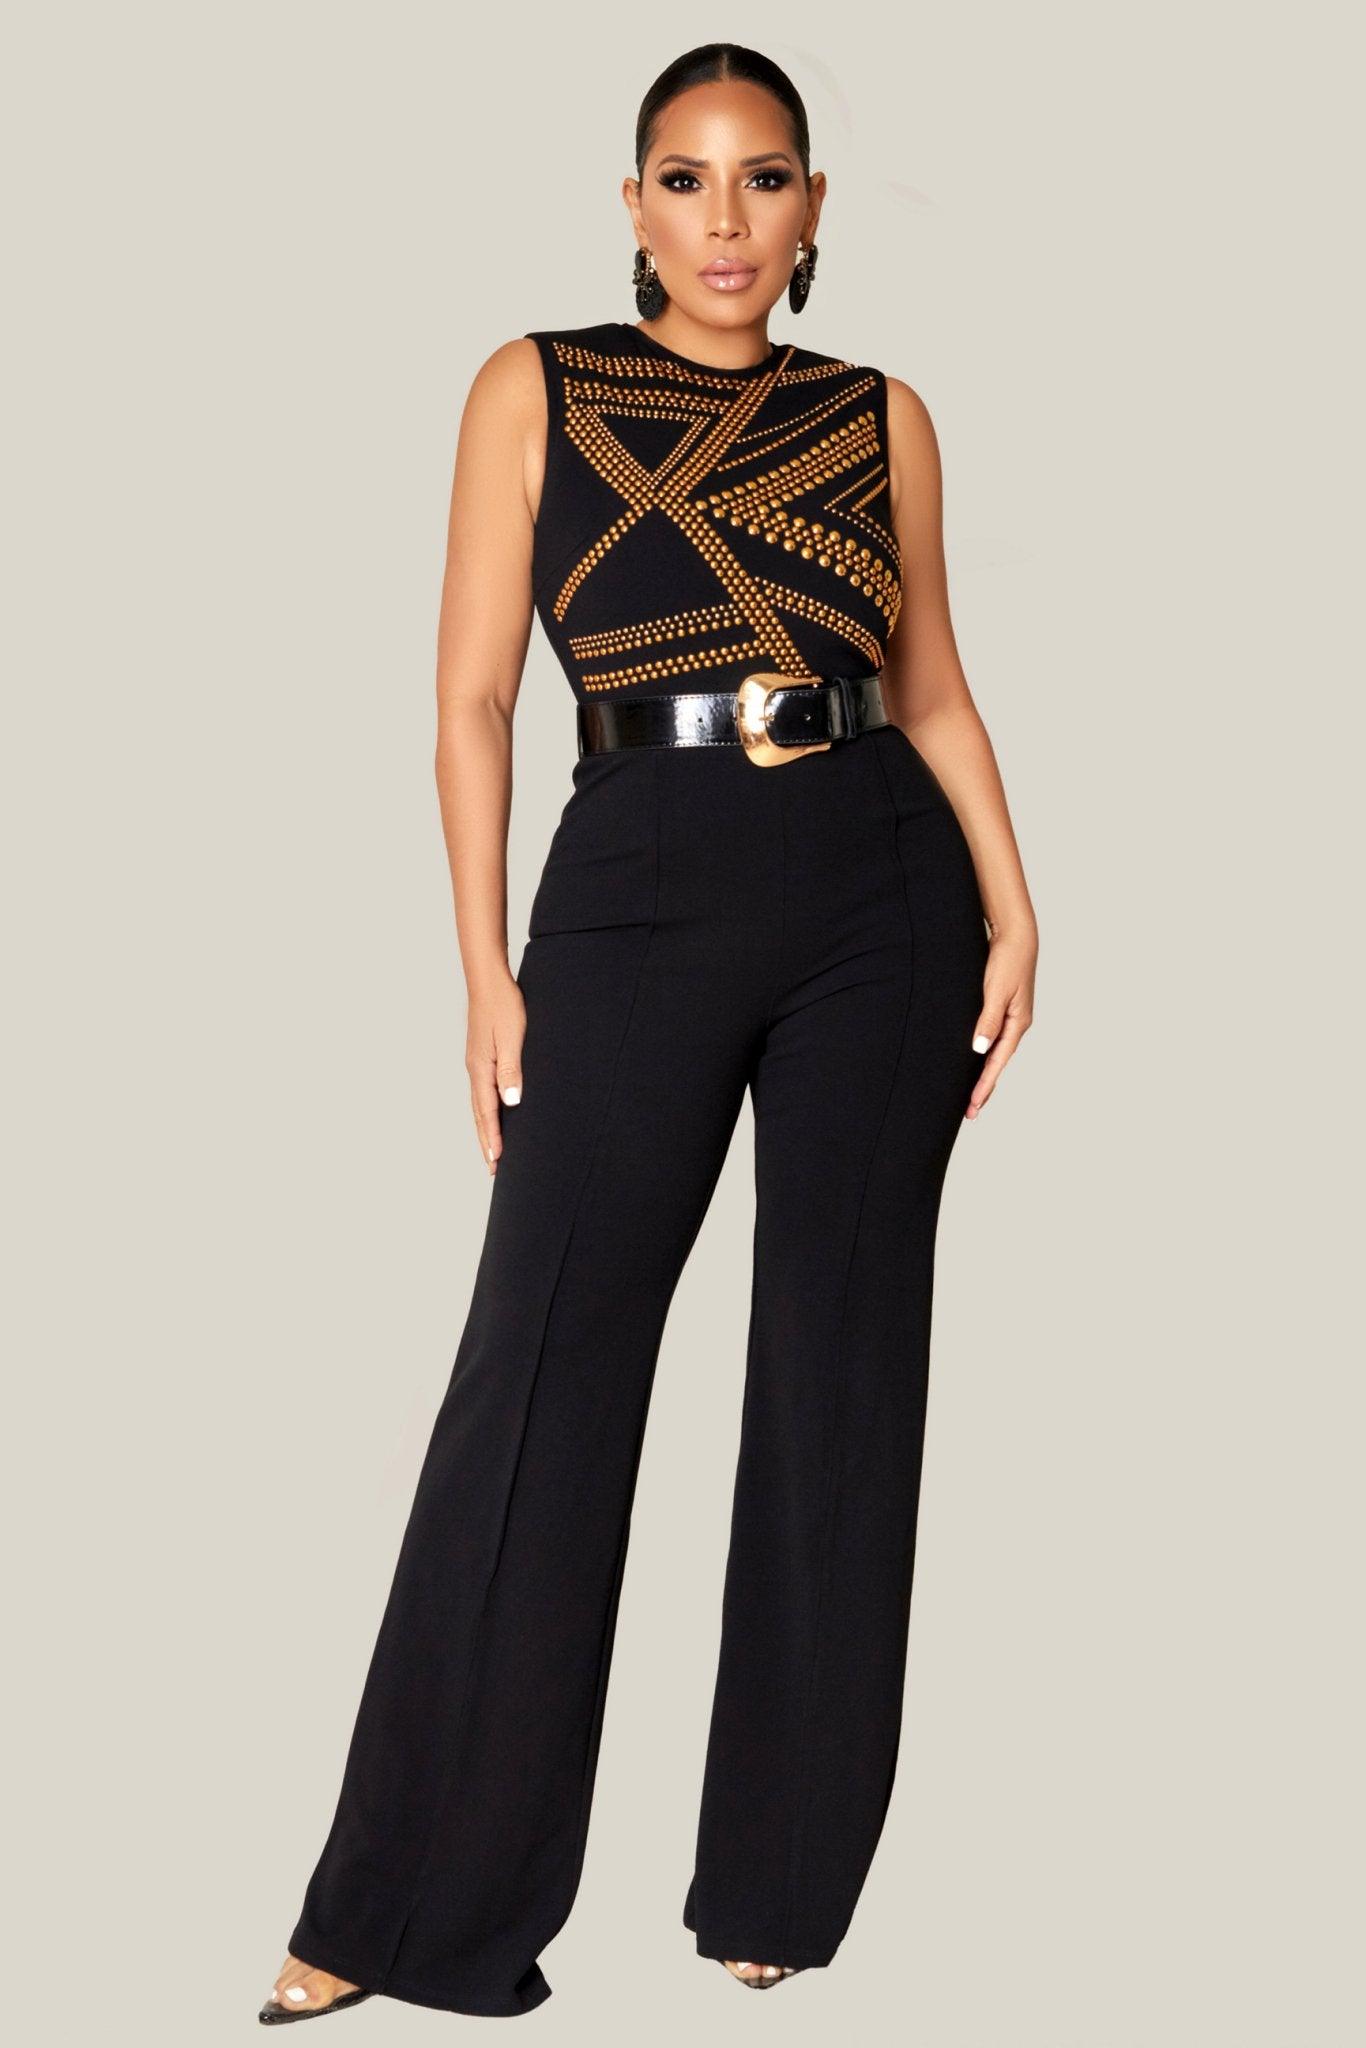 Classic Elegance Belted Jumpsuit - MY SEXY STYLES